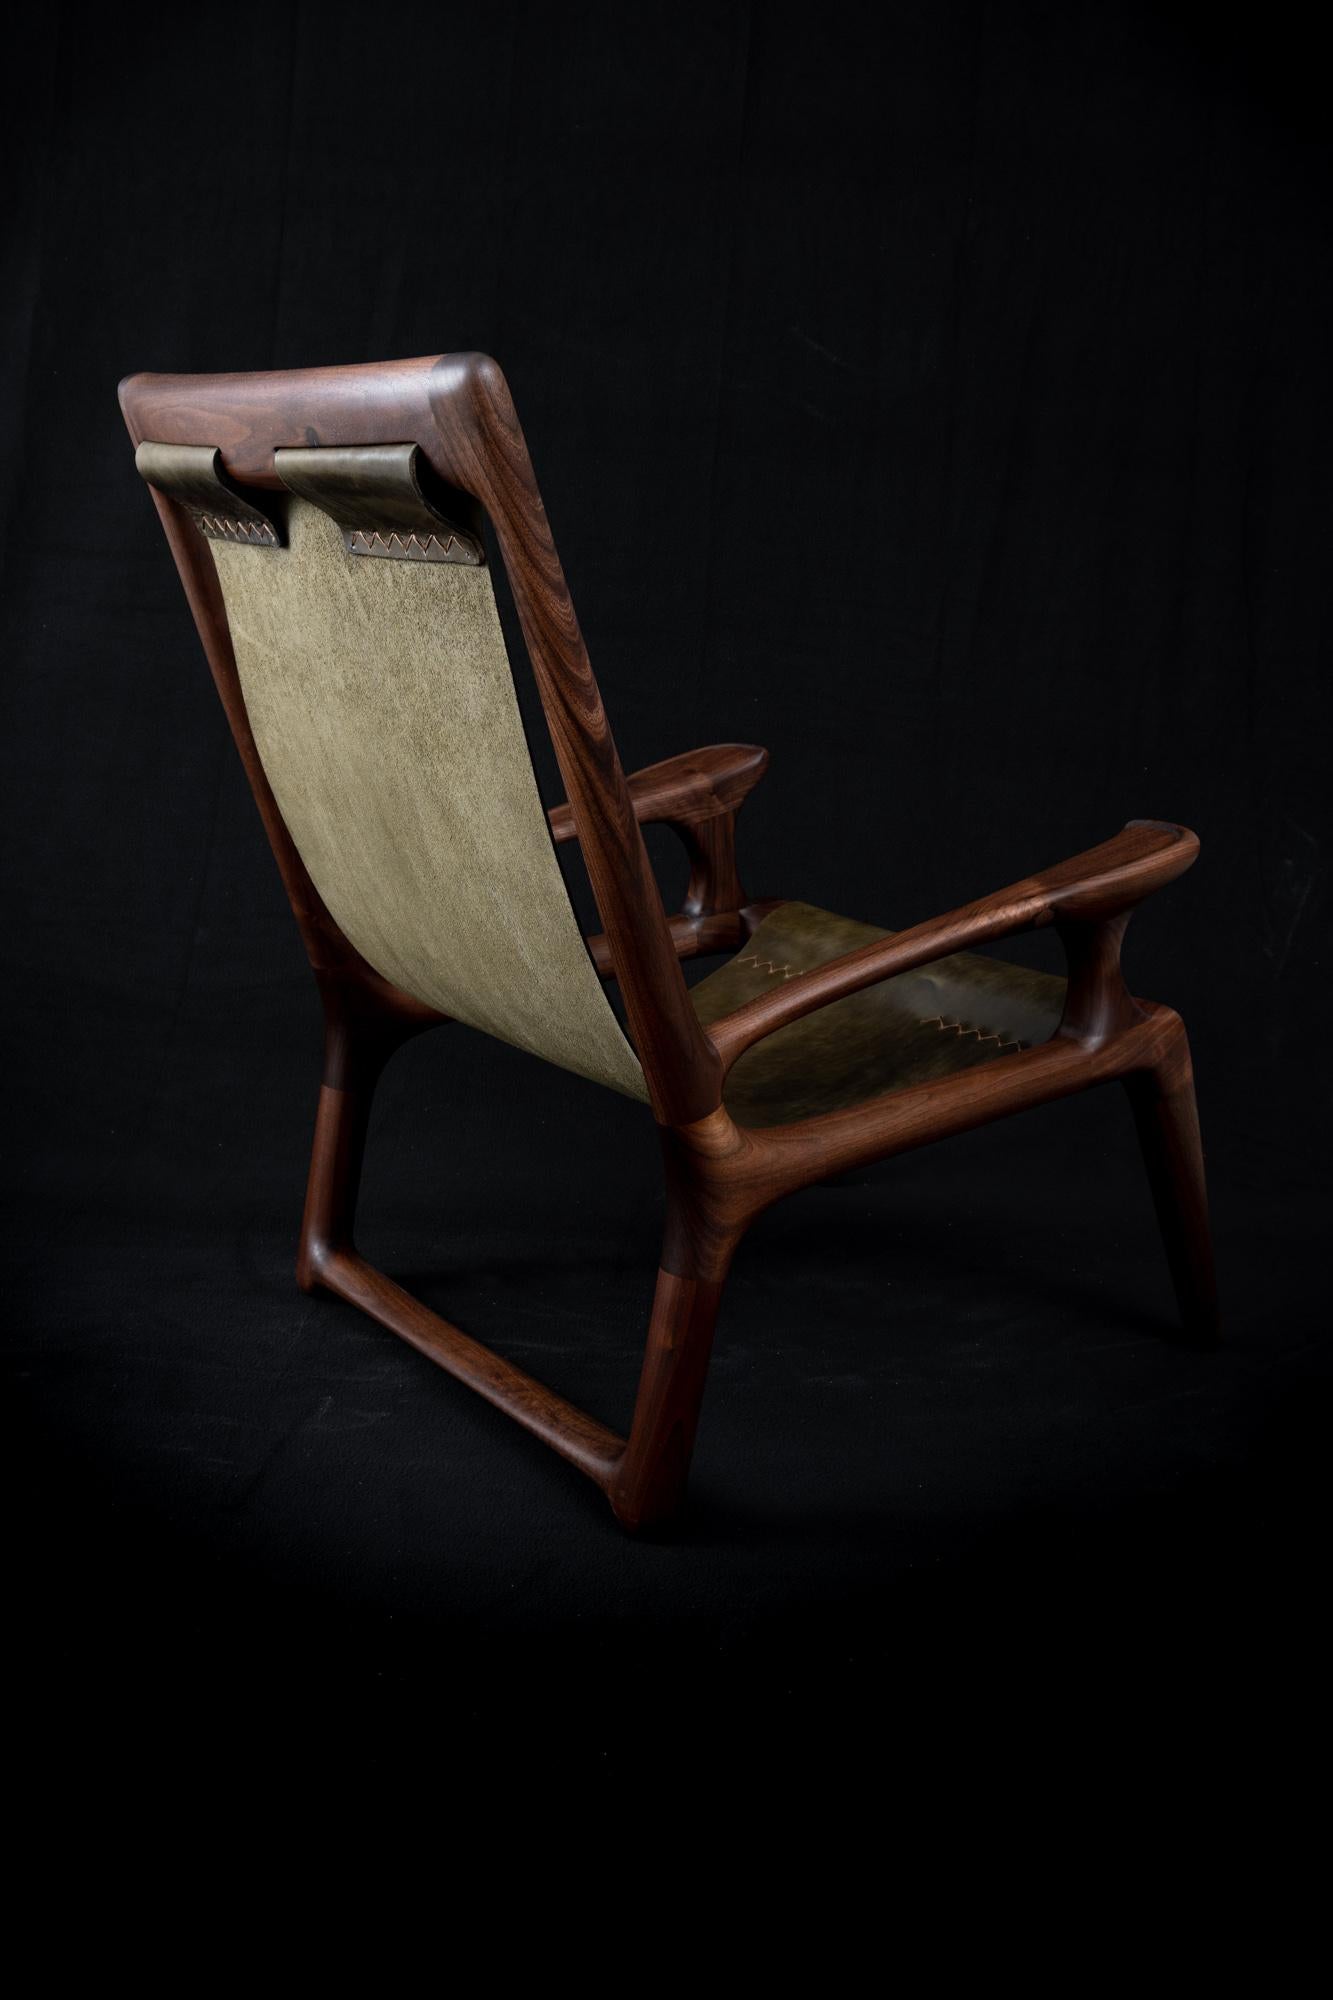 Hand-Carved Sling Chair Mod2 Leather, Arms Connected, Lounge Armchair Walnut + Olive Leather For Sale